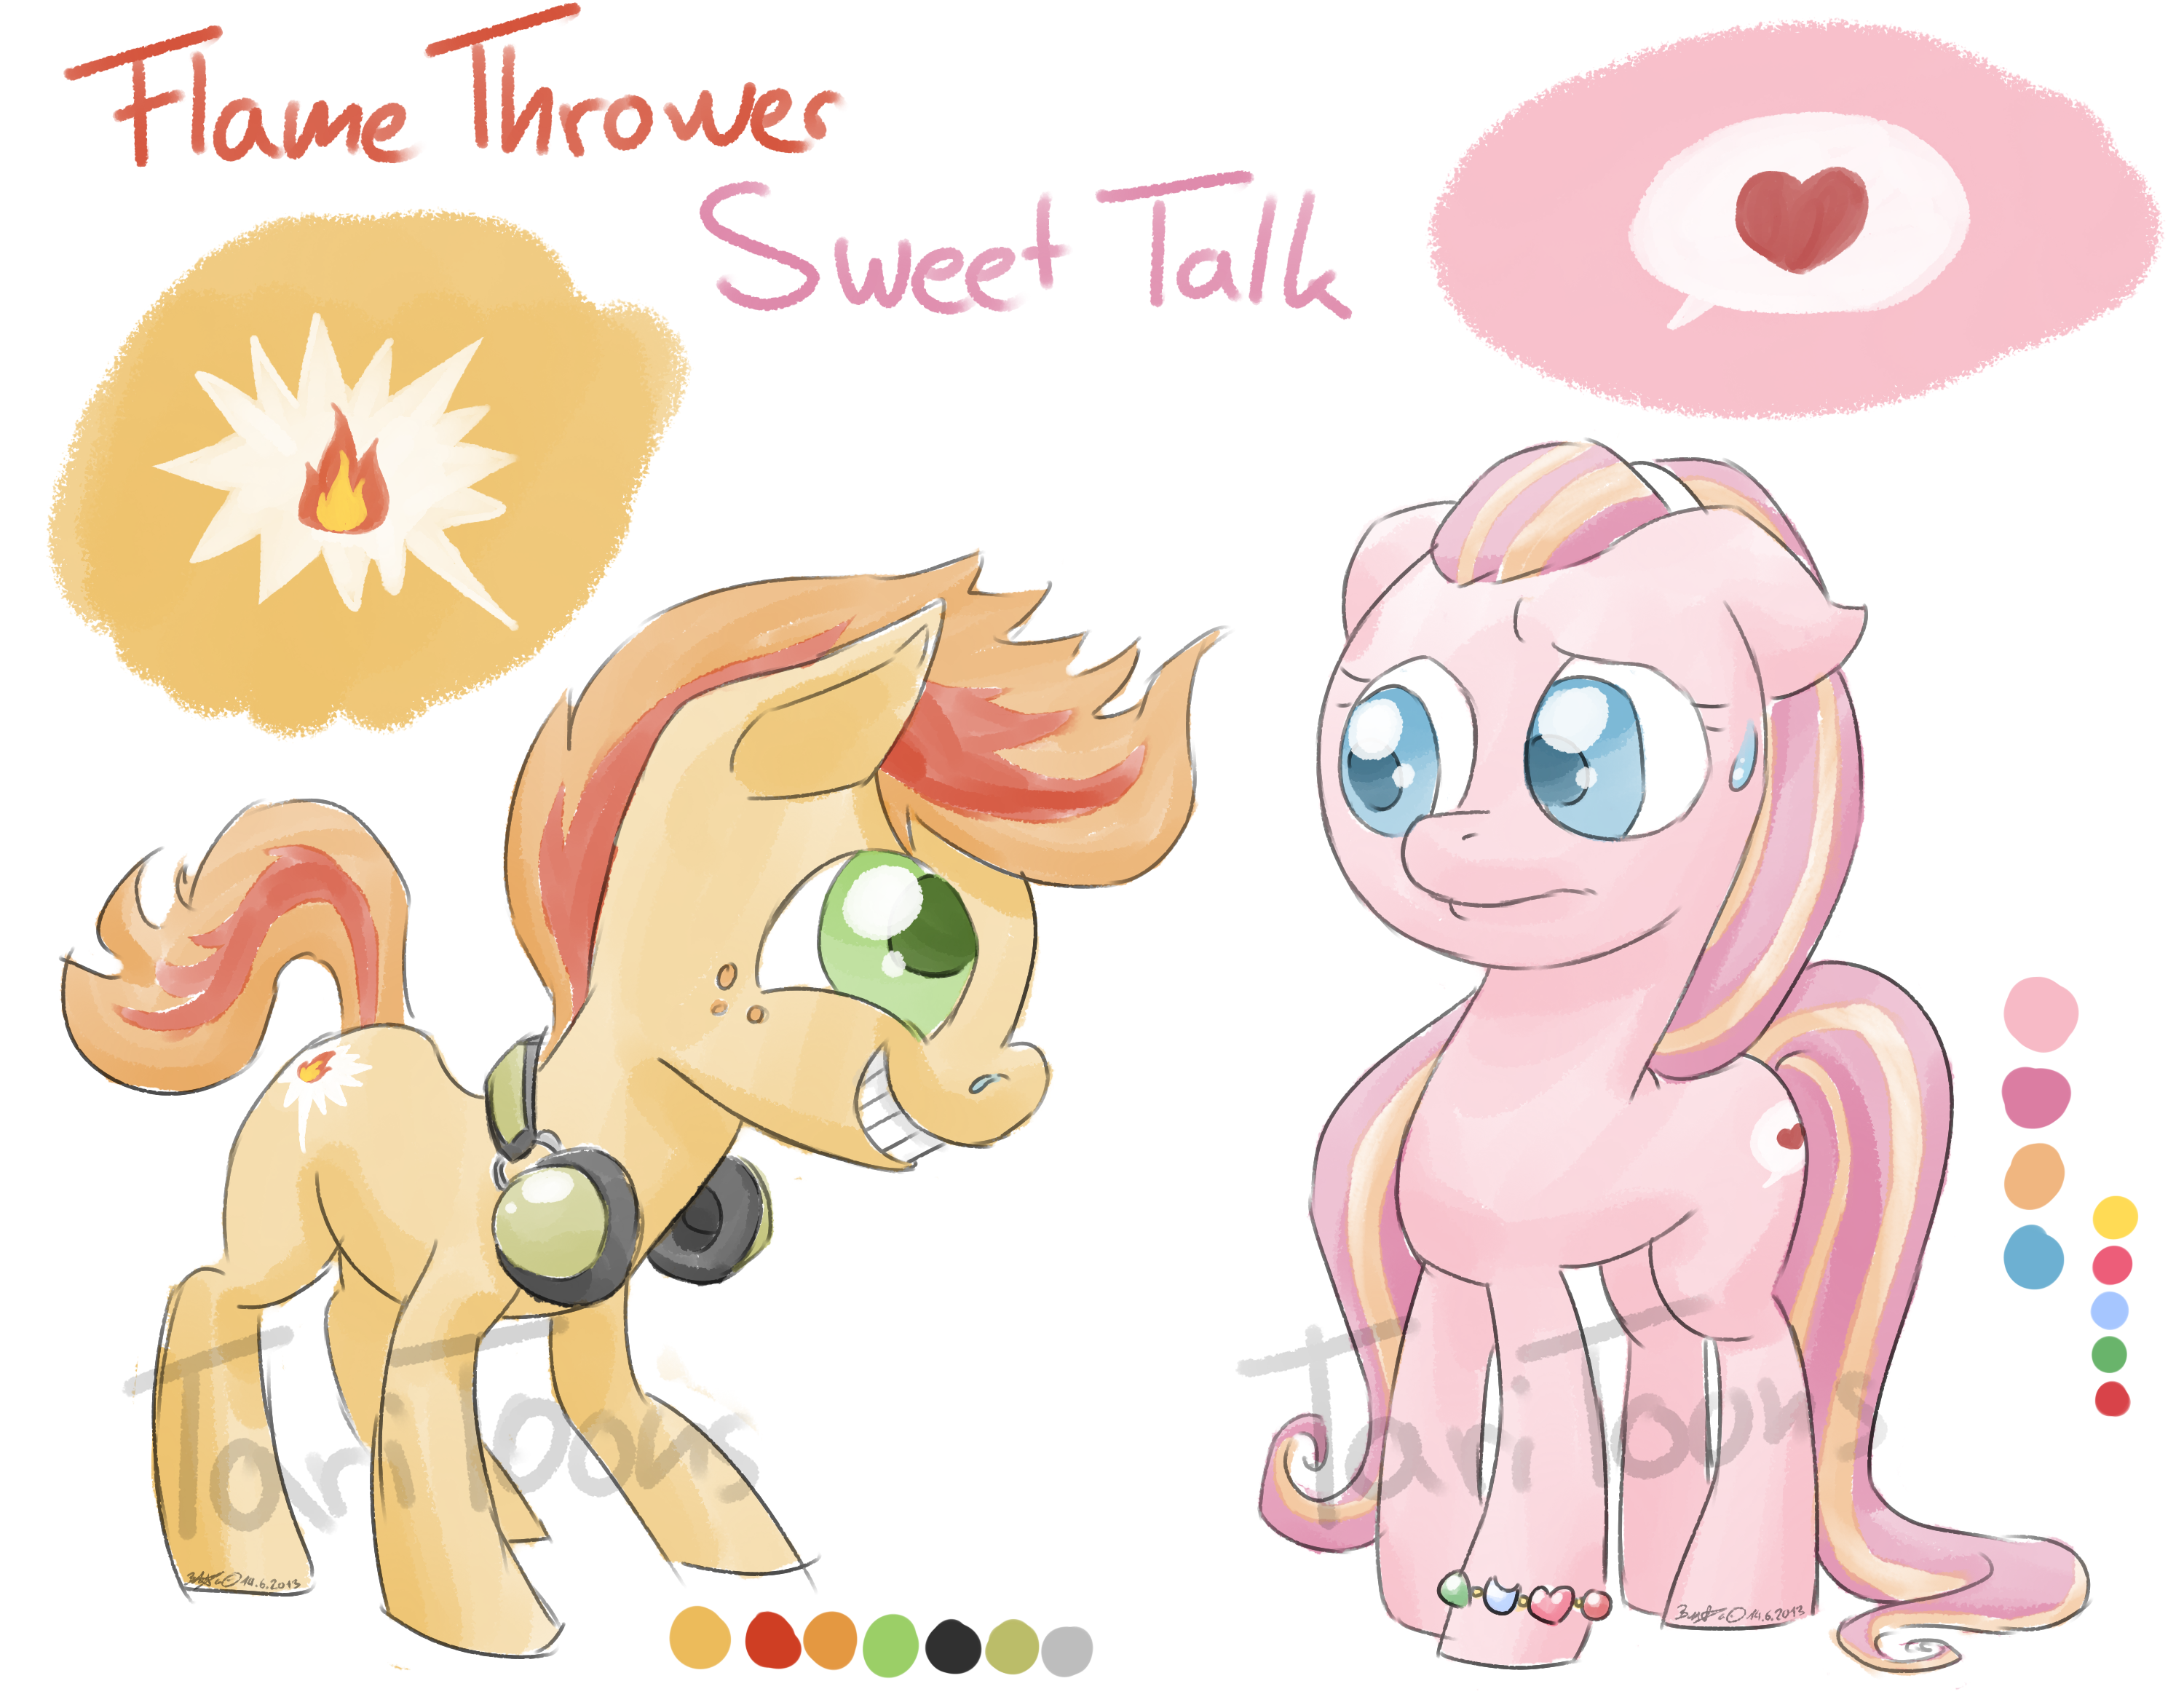 [Bild: flame_thrower_amp_sweet_talk1_by_taritoons-d691273.png]